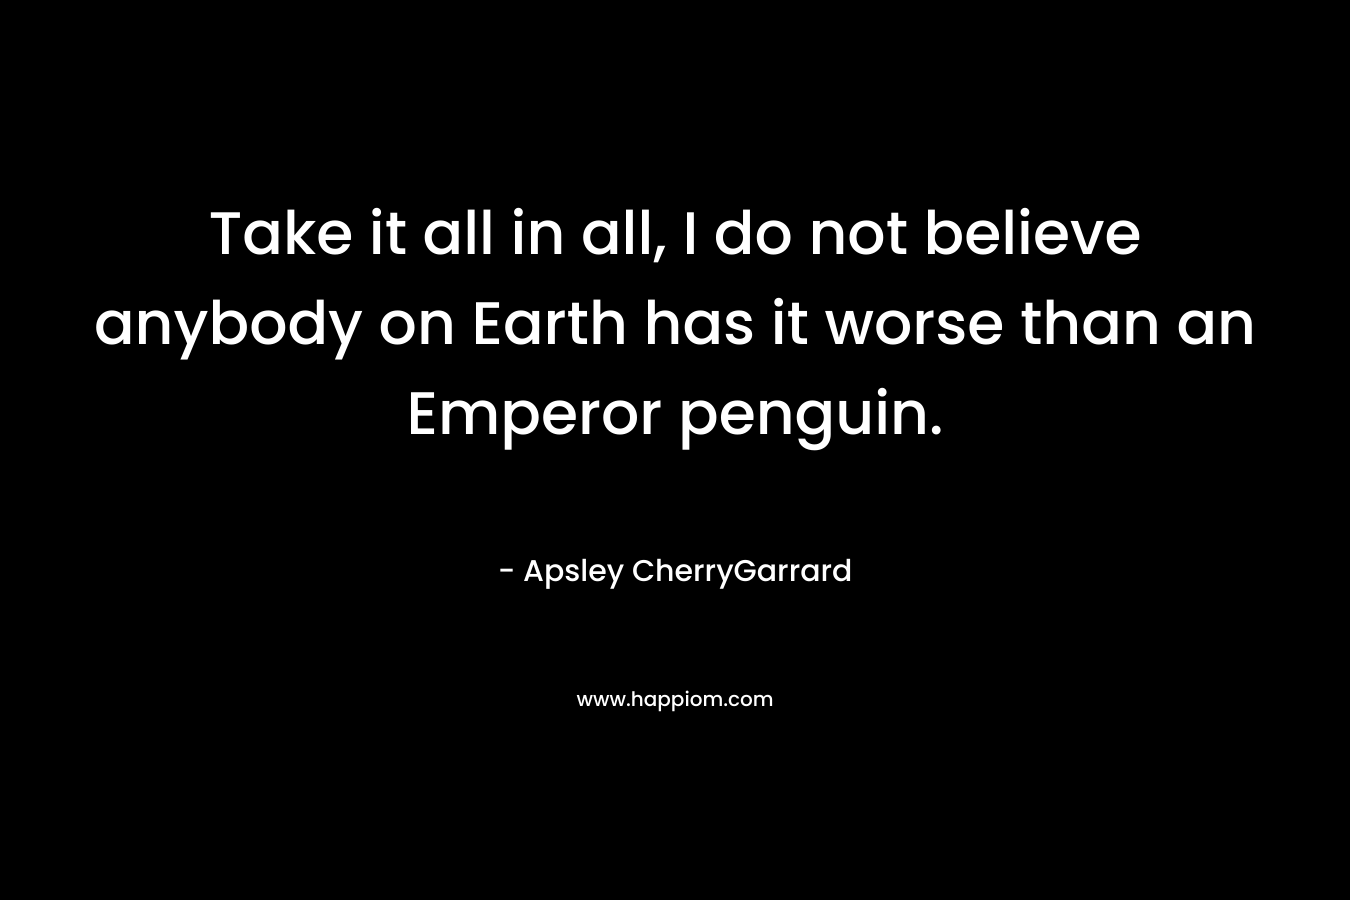 Take it all in all, I do not believe anybody on Earth has it worse than an Emperor penguin. – Apsley CherryGarrard